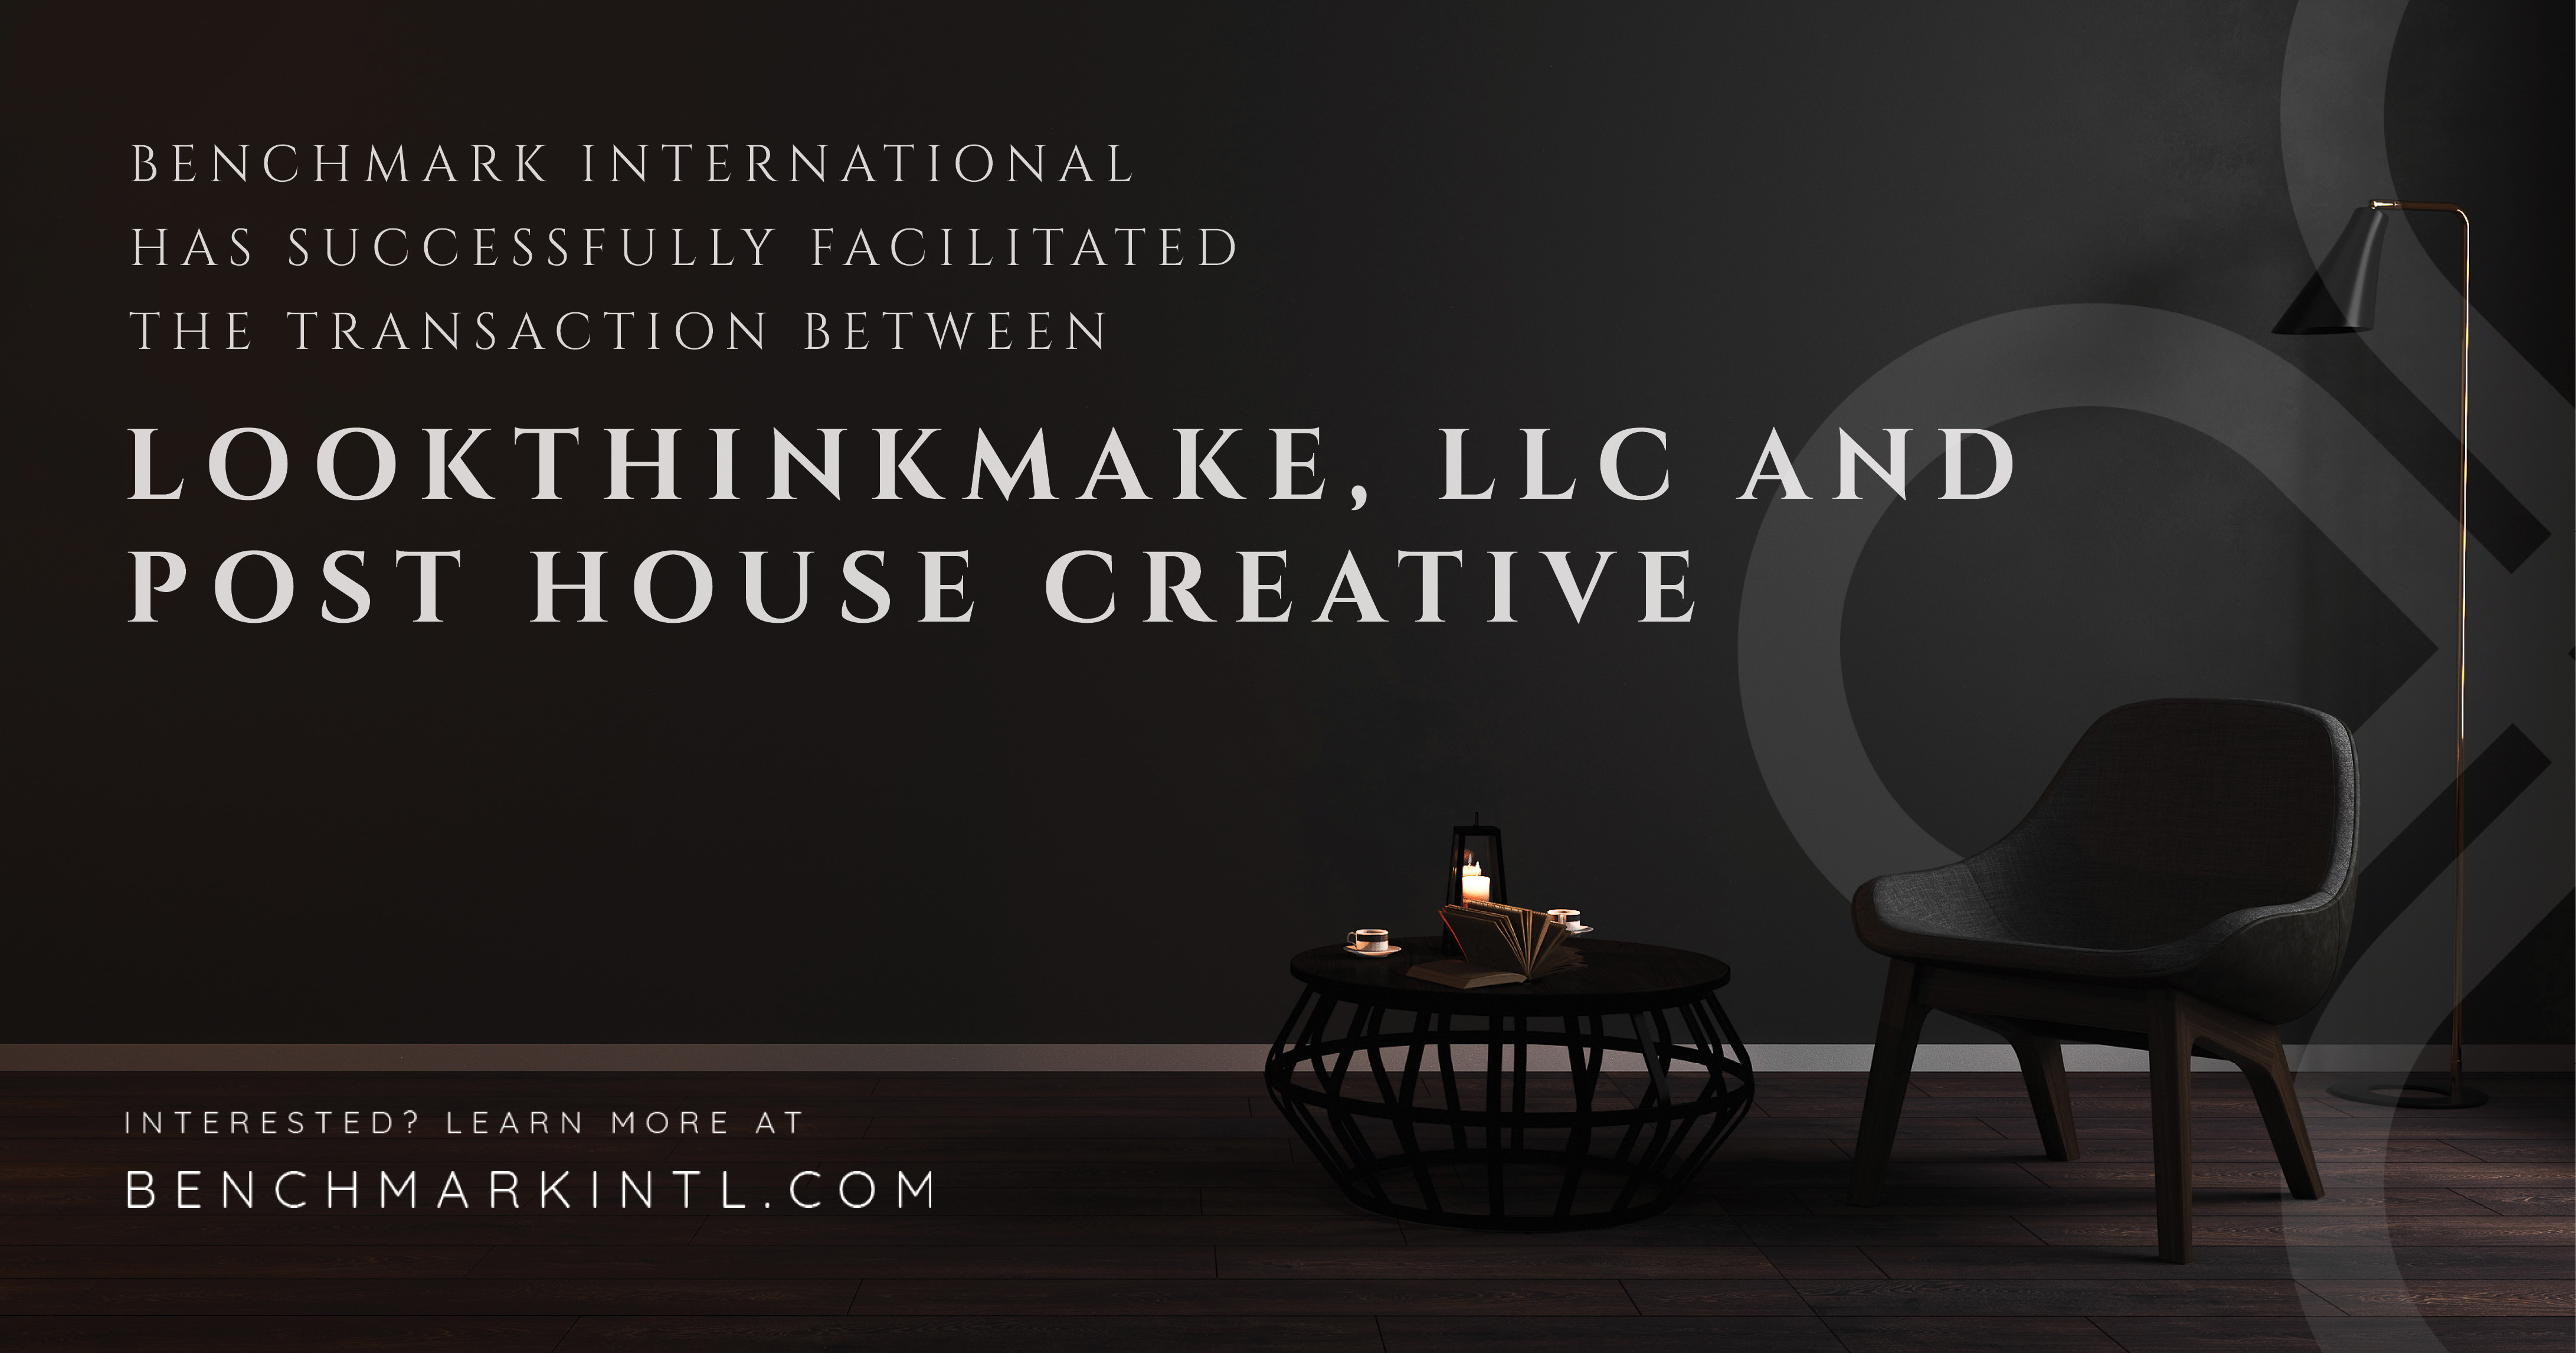 Benchmark International Facilitated The Transaction Of Lookthinkmake, LLC And Post House Creative